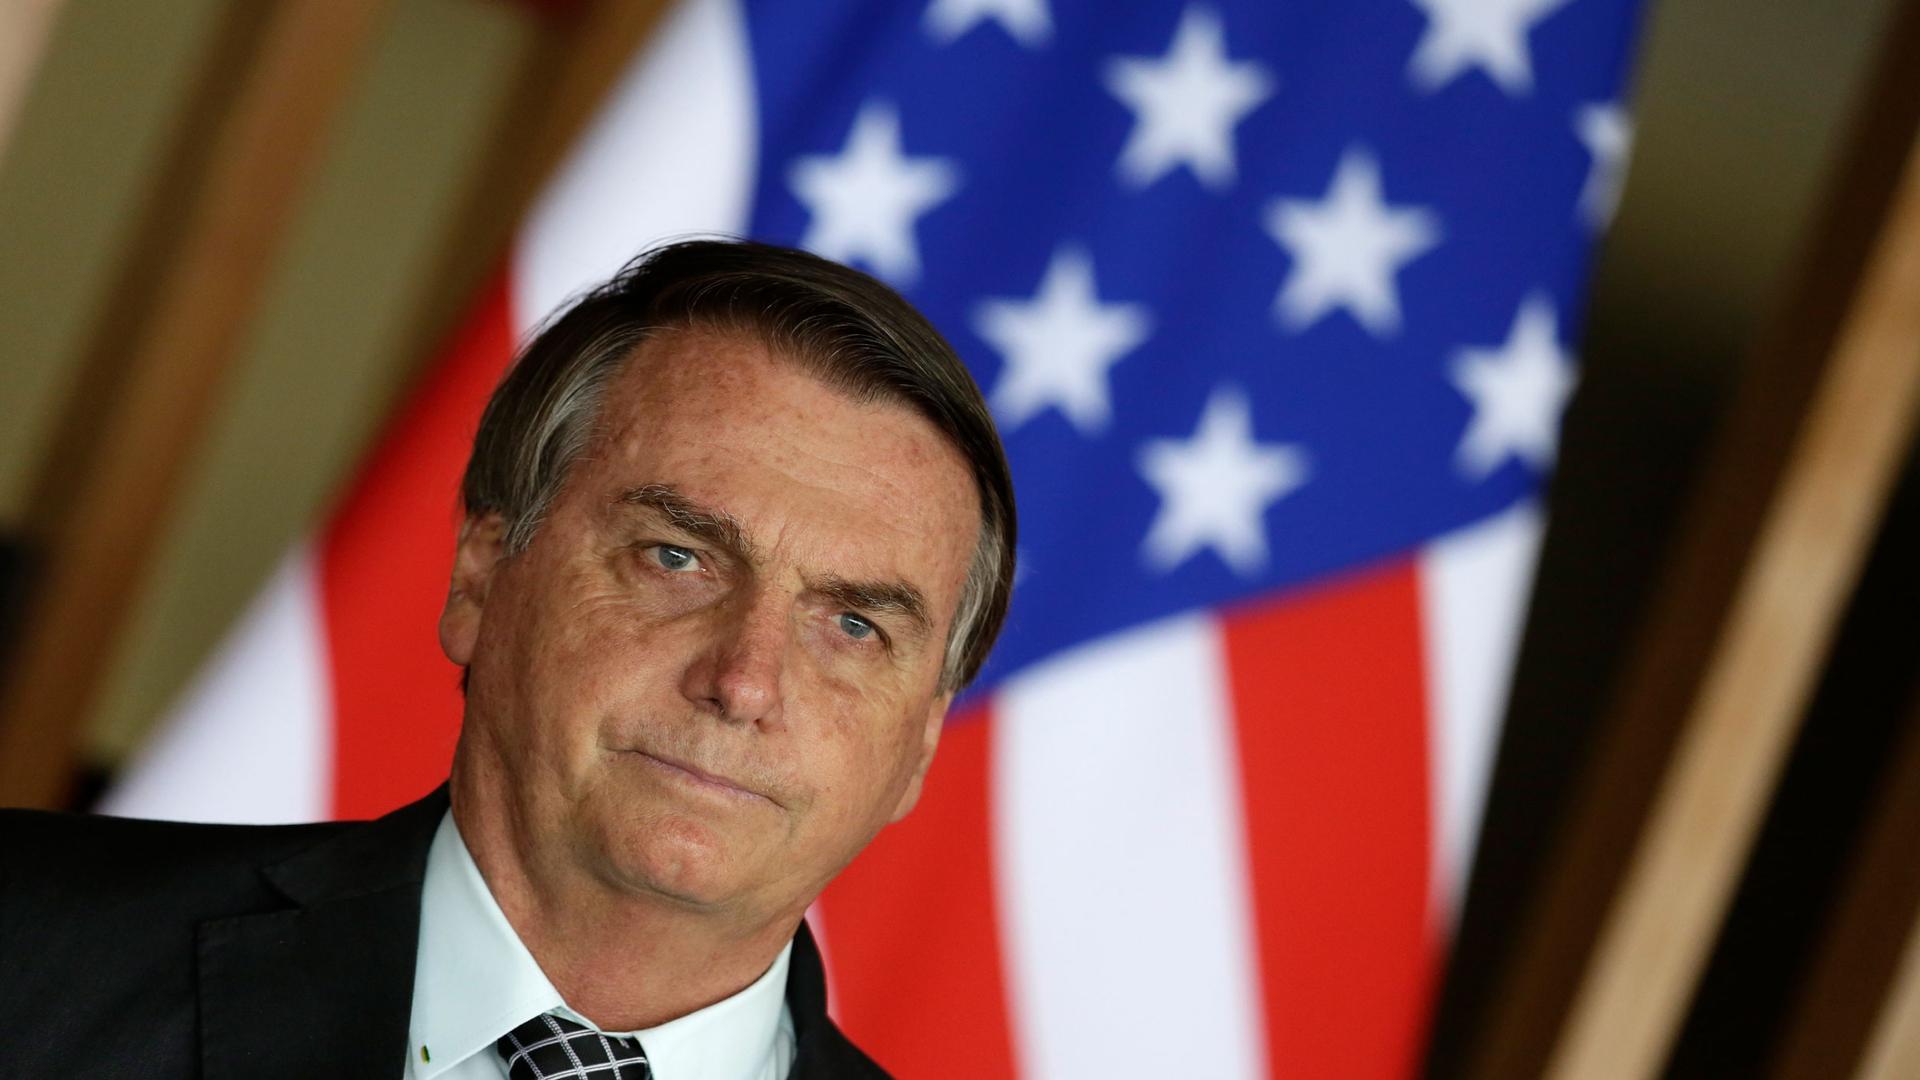 Brazil's President Jair Bolsonaro stands in front of a US flag during a news conference at Itamaraty Palace in Brasilia, Brazil, Tuesday, Oct. 20, 2020. 